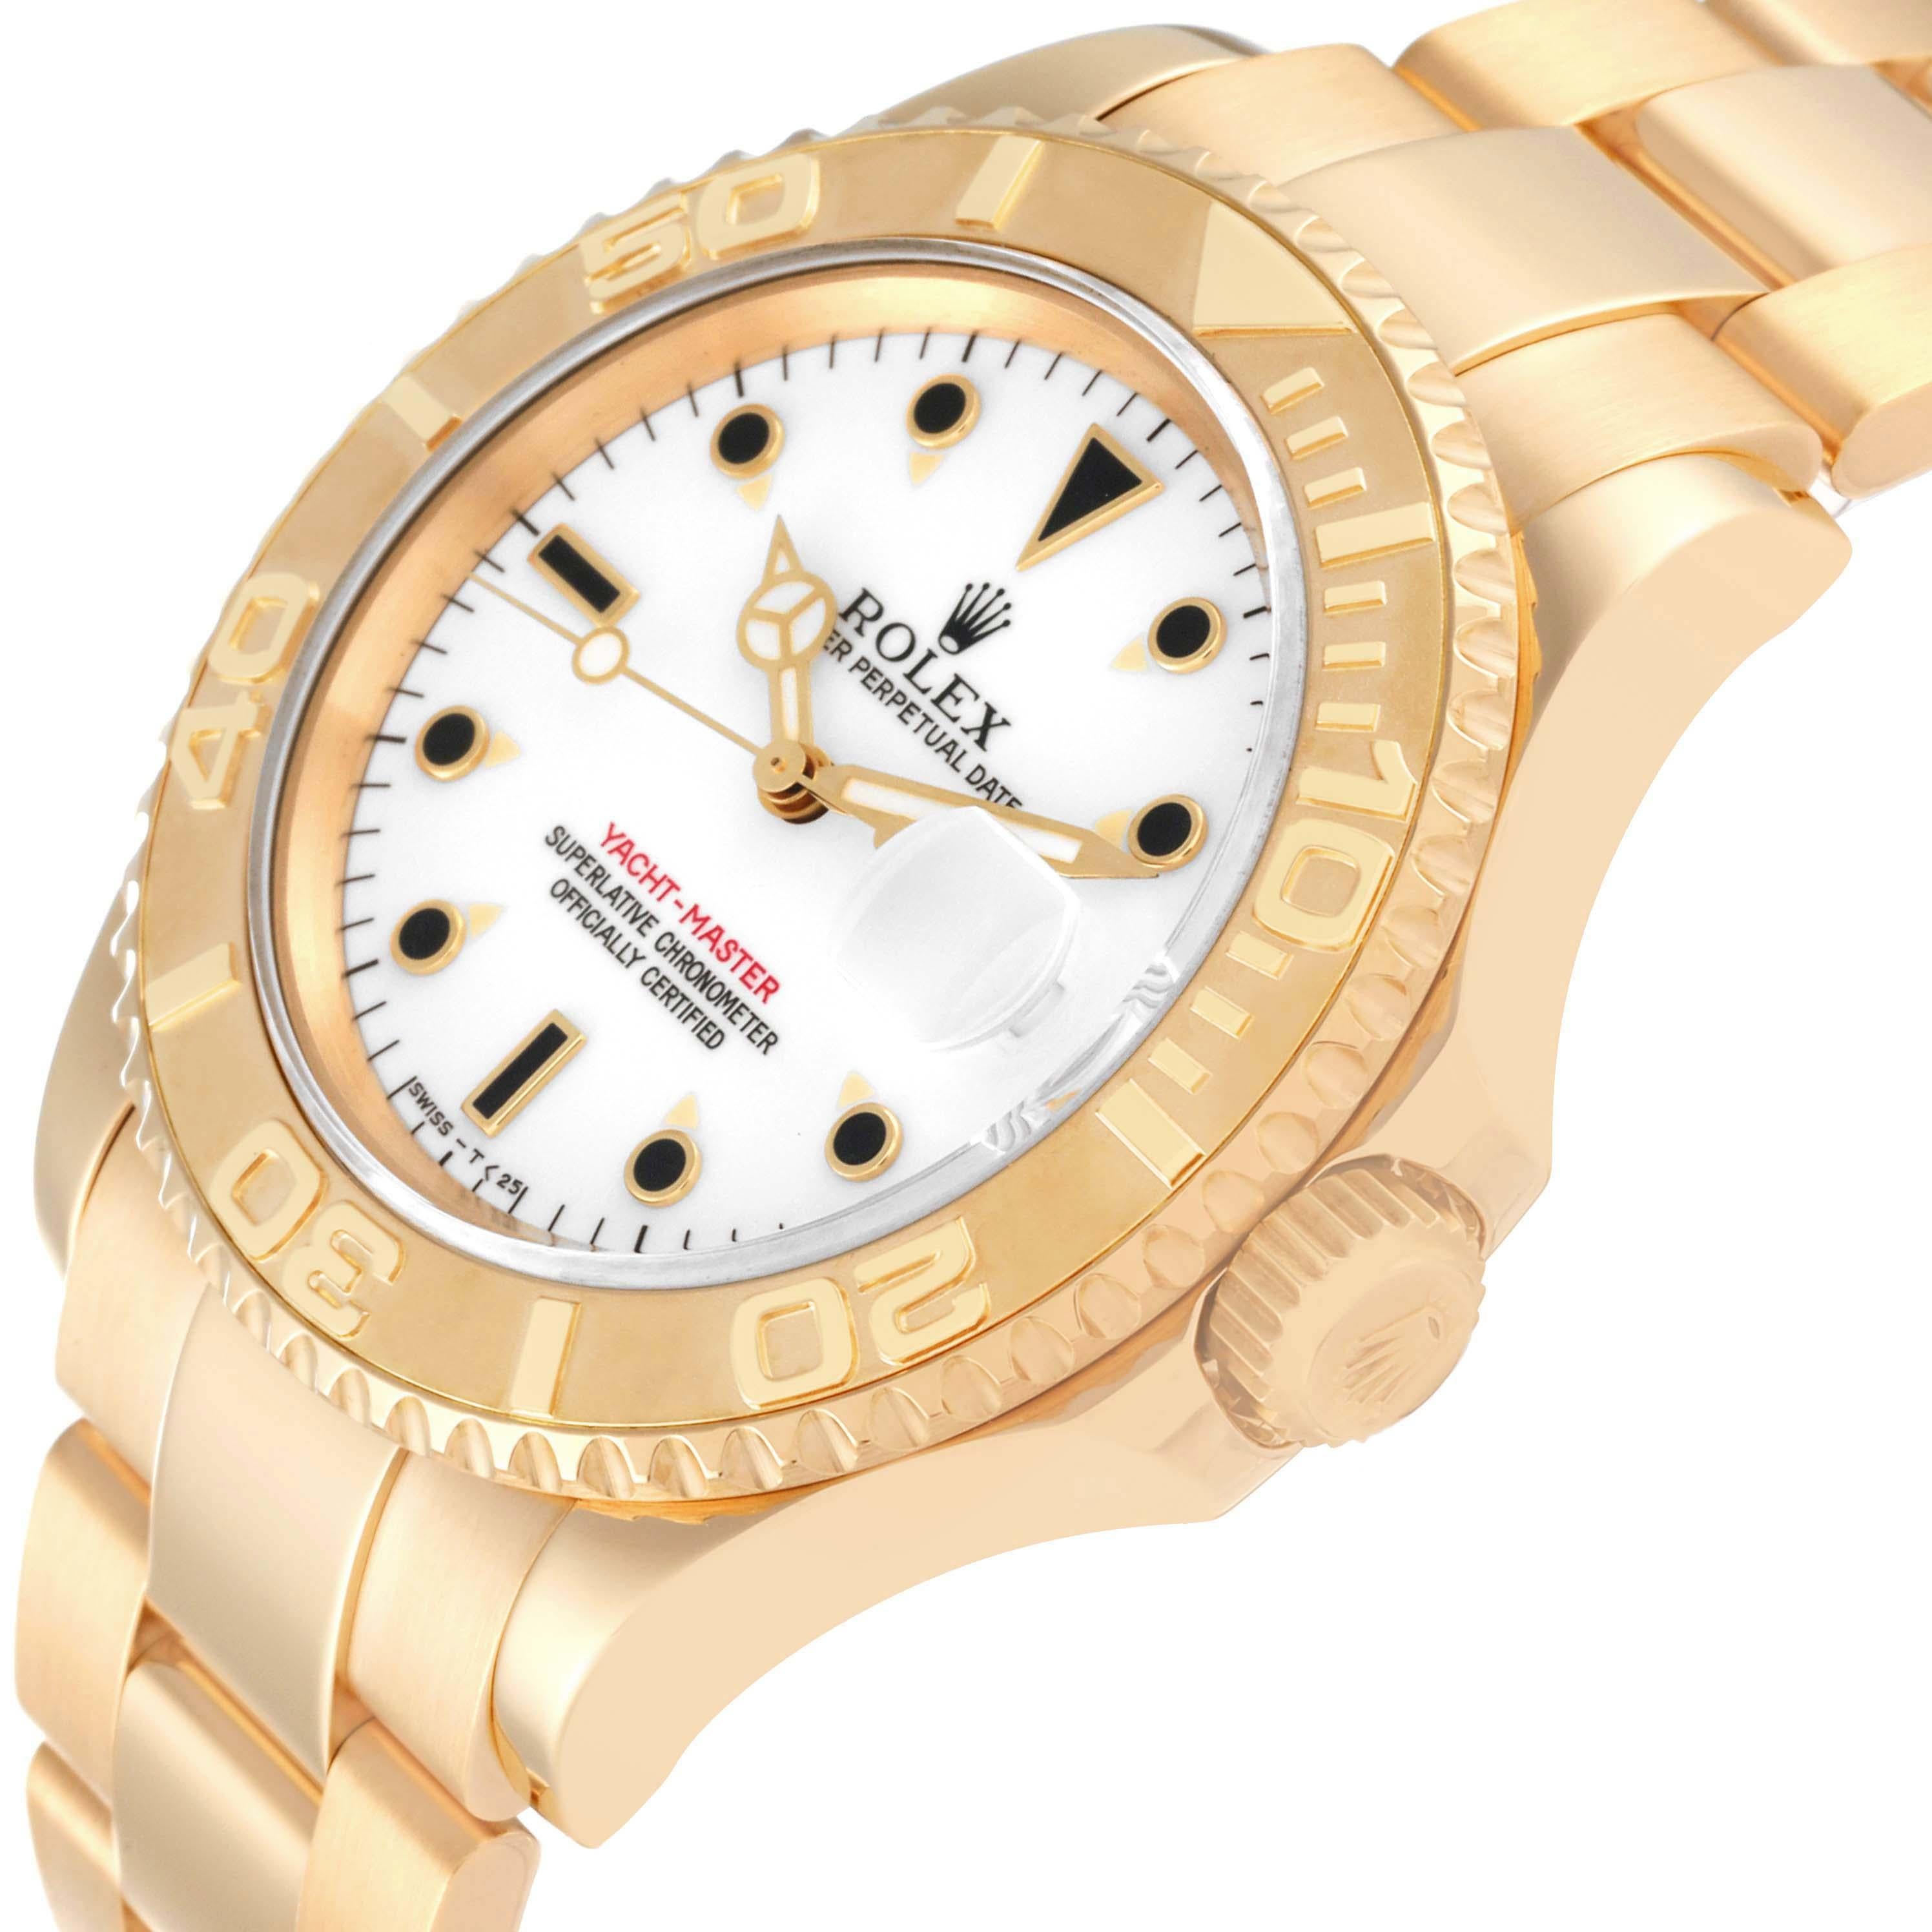 Rolex Yachtmaster 40mm Yellow Gold White Dial Mens Watch 16628 6